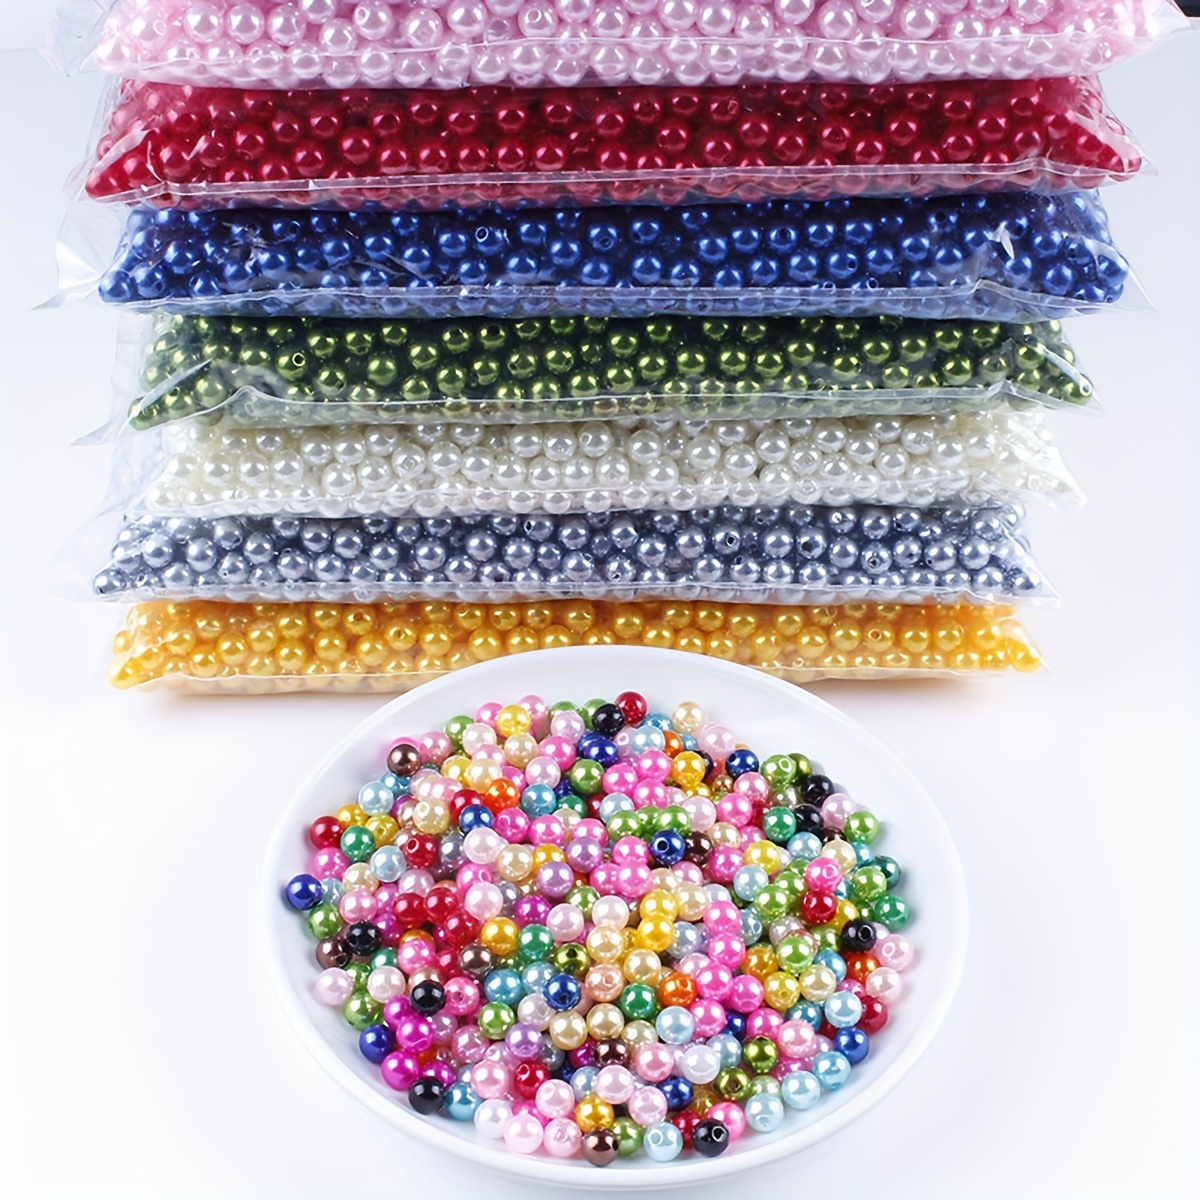 1200Pcs Pearl Beads,7mm 24 Colors Multicolor Pearl Beads Loose Spacer Beads  with Hole for Jewelry Making, Round Rainbow Pearl Beads for DIY Craft